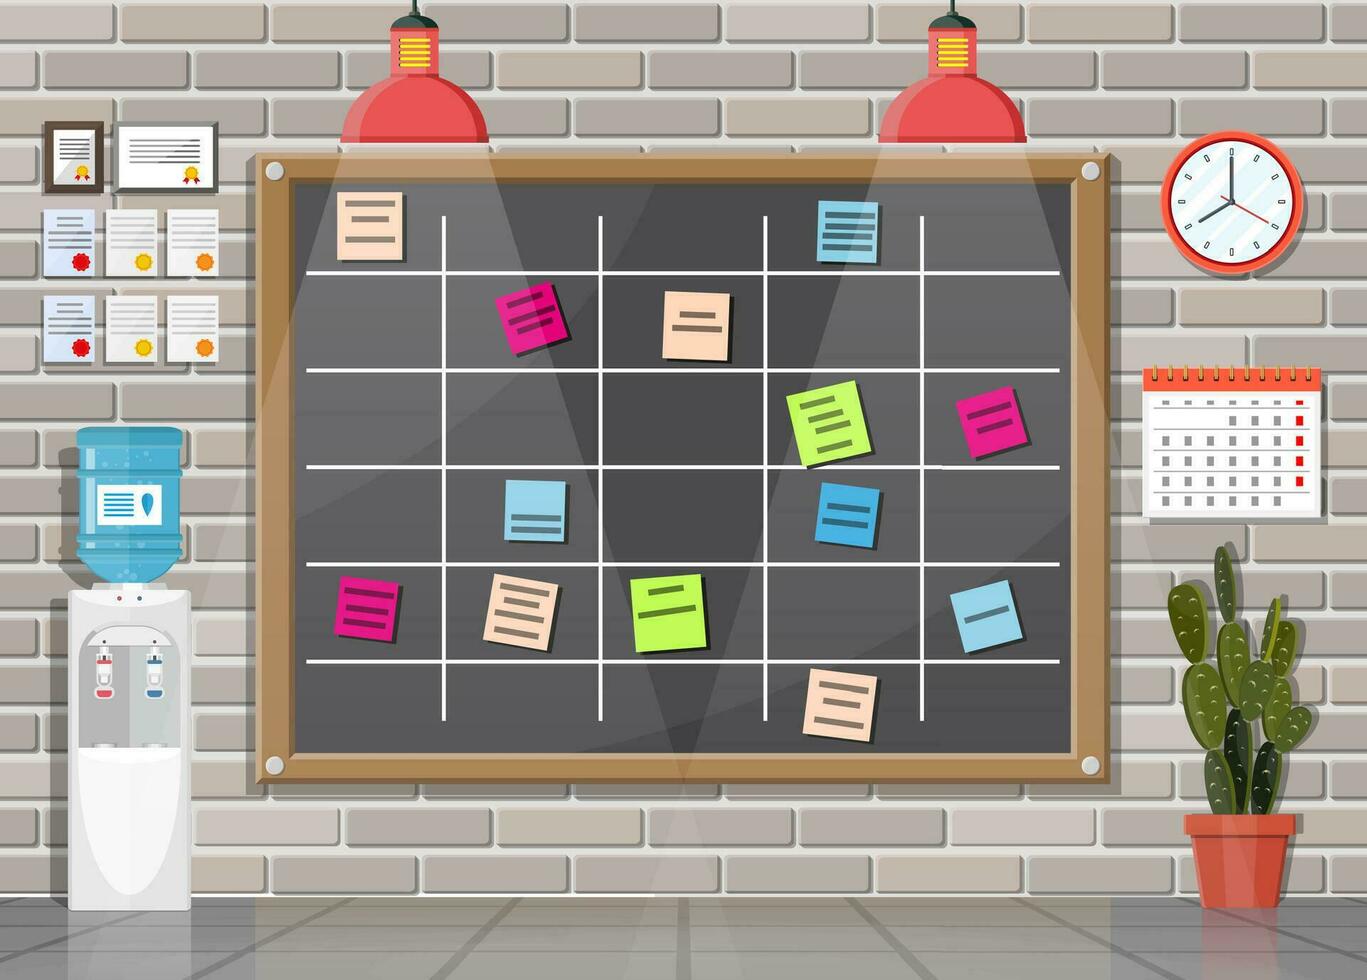 Scrum agile board in office interior. Bulletin board hanging on wall full of tasks on sticky note cards. List of event for employee. Development, team work, agenda to do list. Flat vector illustration